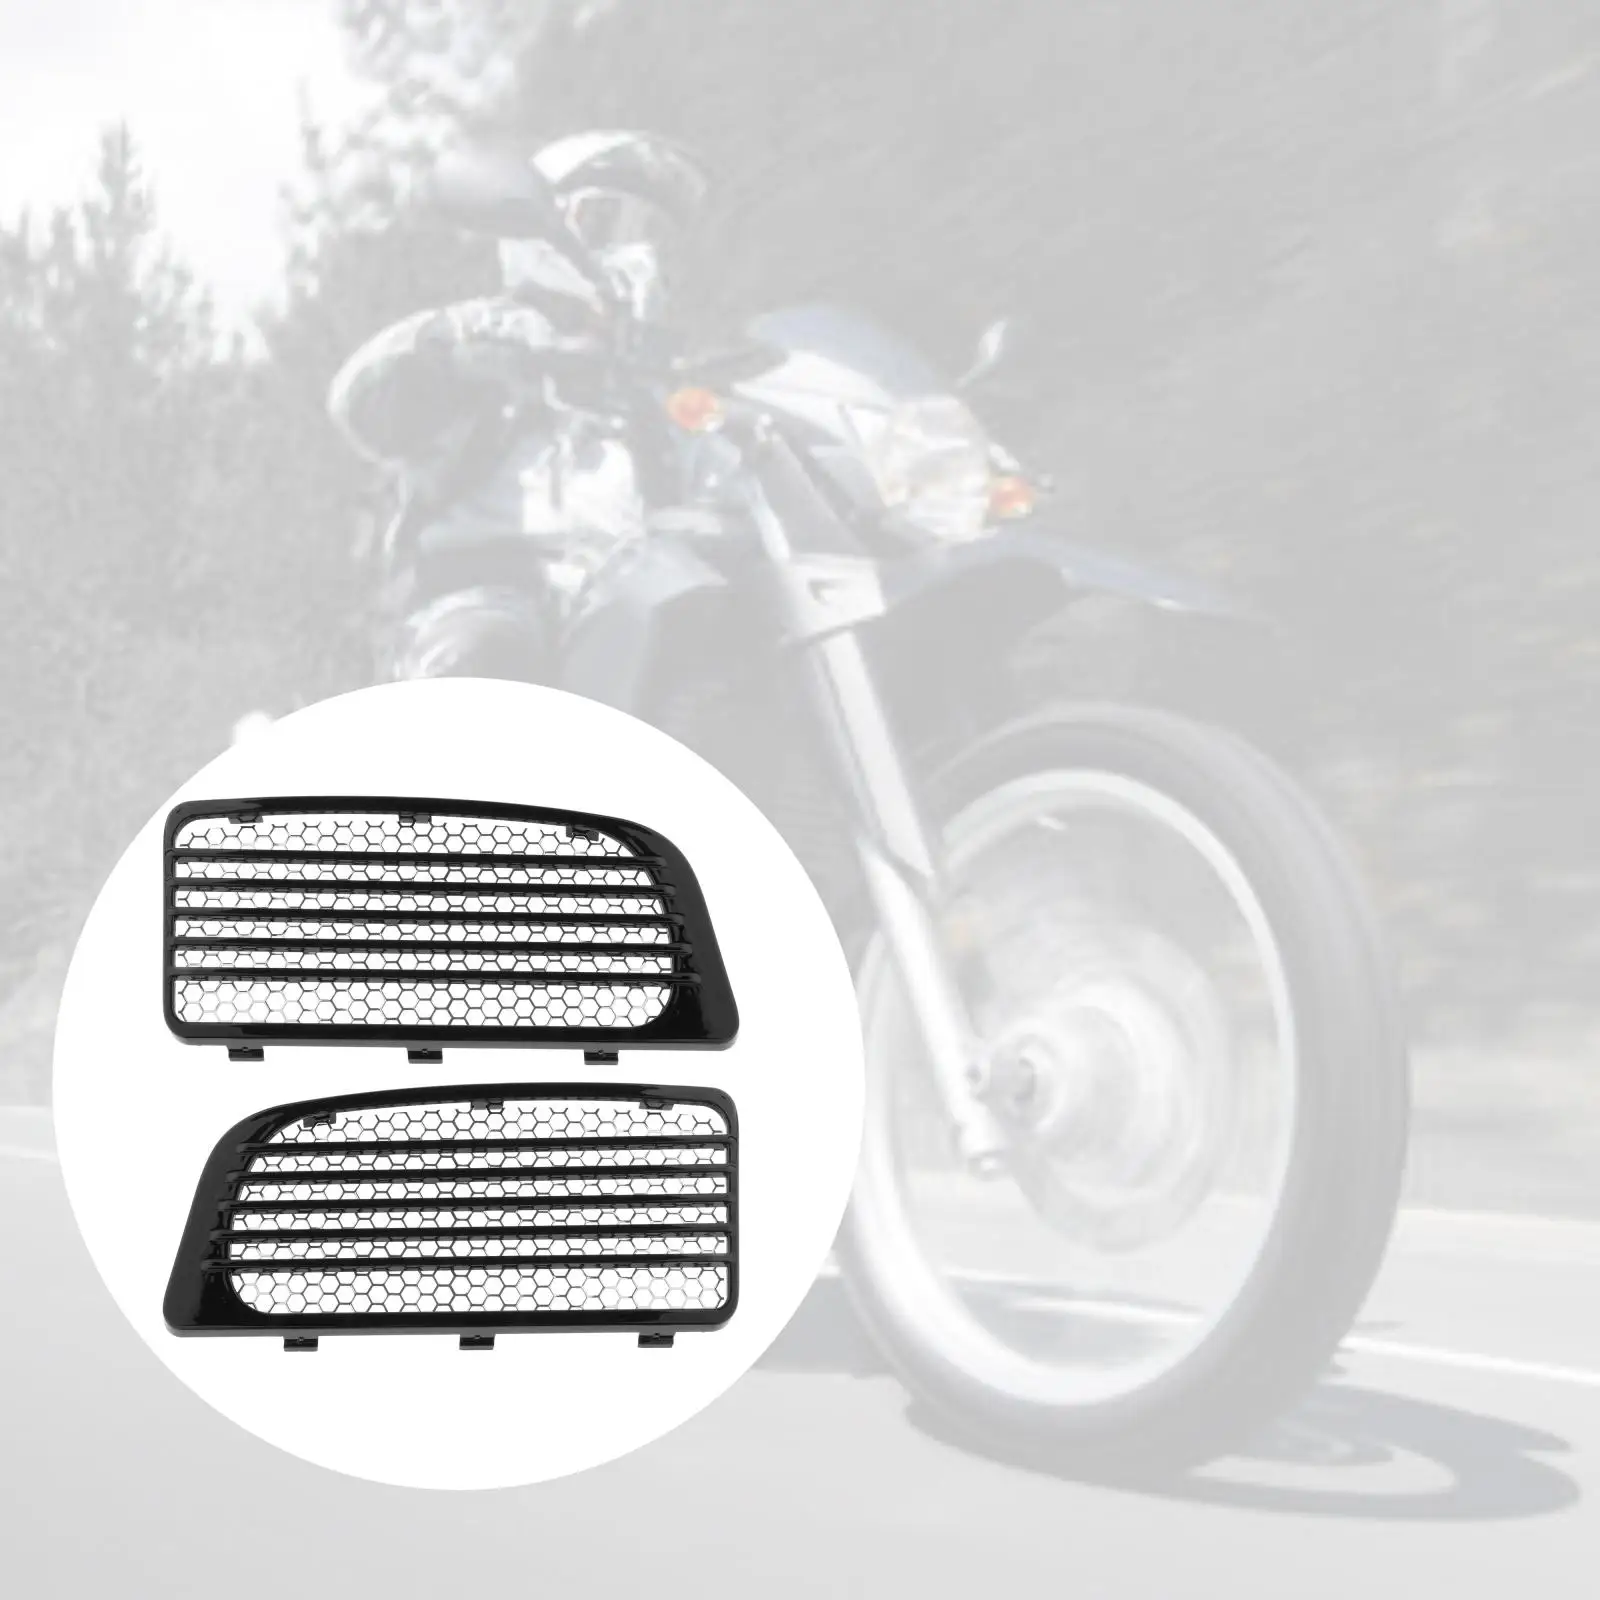 1Pair Motorcycle Radiator Grills w/ Metal Mesh Fit for Harley Touring Twin Cooled 14+ Motorbike Replacement Parts